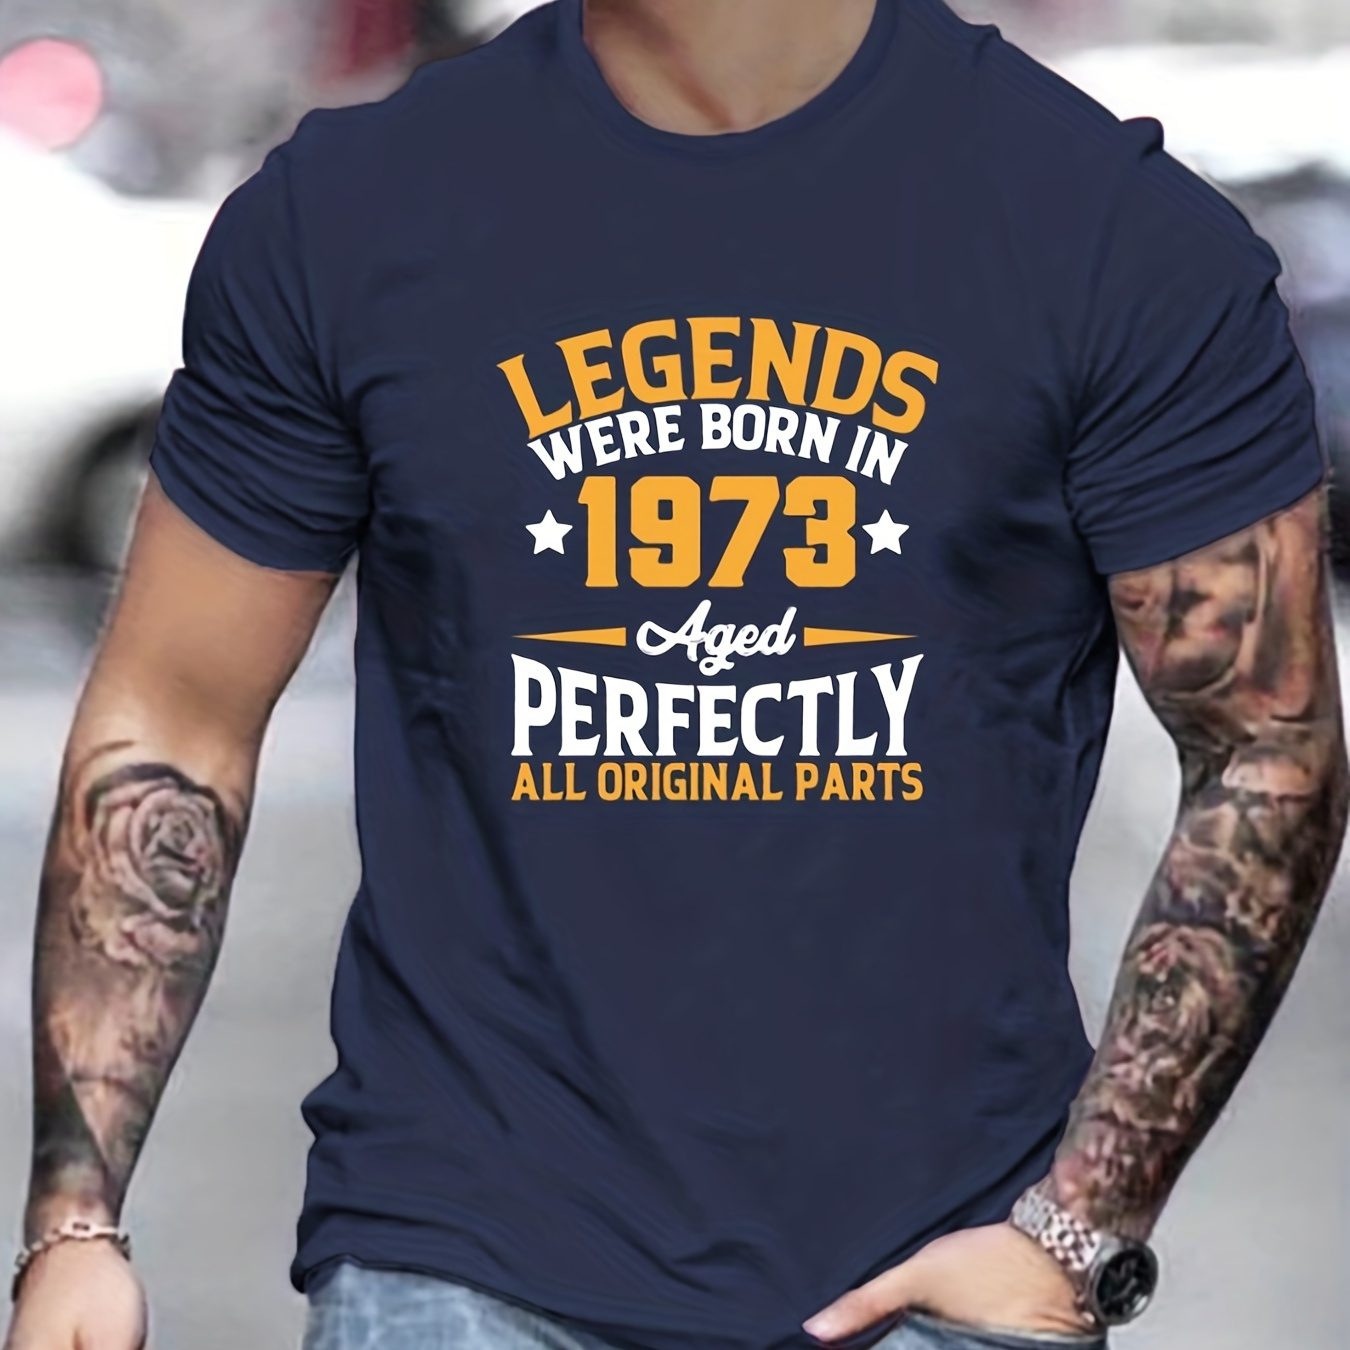 

Men's Casual "legends Were Born In 1973" Slightly Stretch Graphic Tee, Male Clothes For Summer